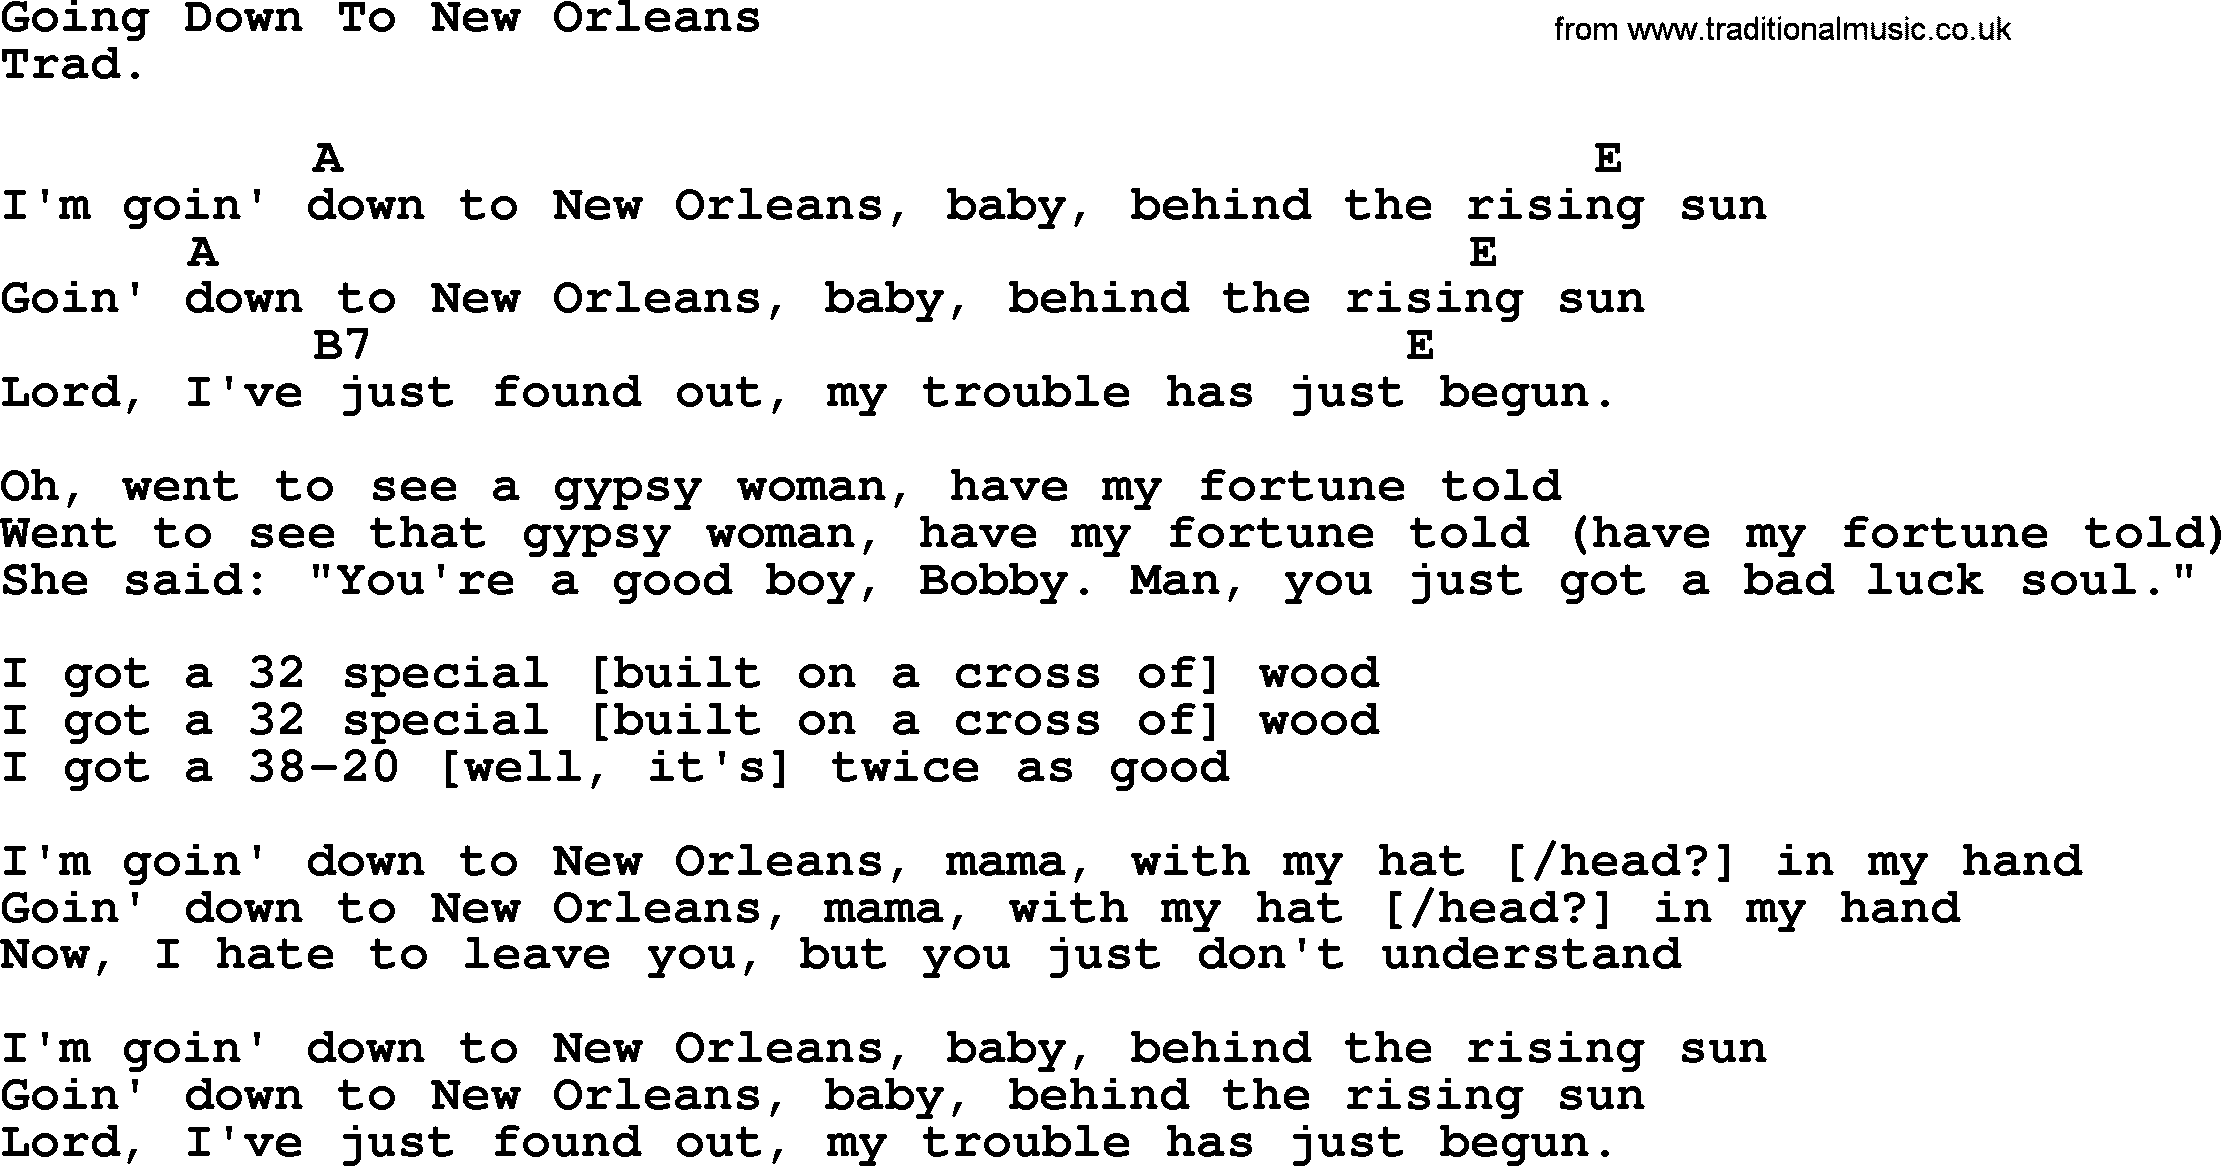 Top 1000 Most Popular Folk and Old-time Songs: Going Down To New Orleans, lyrics and chords